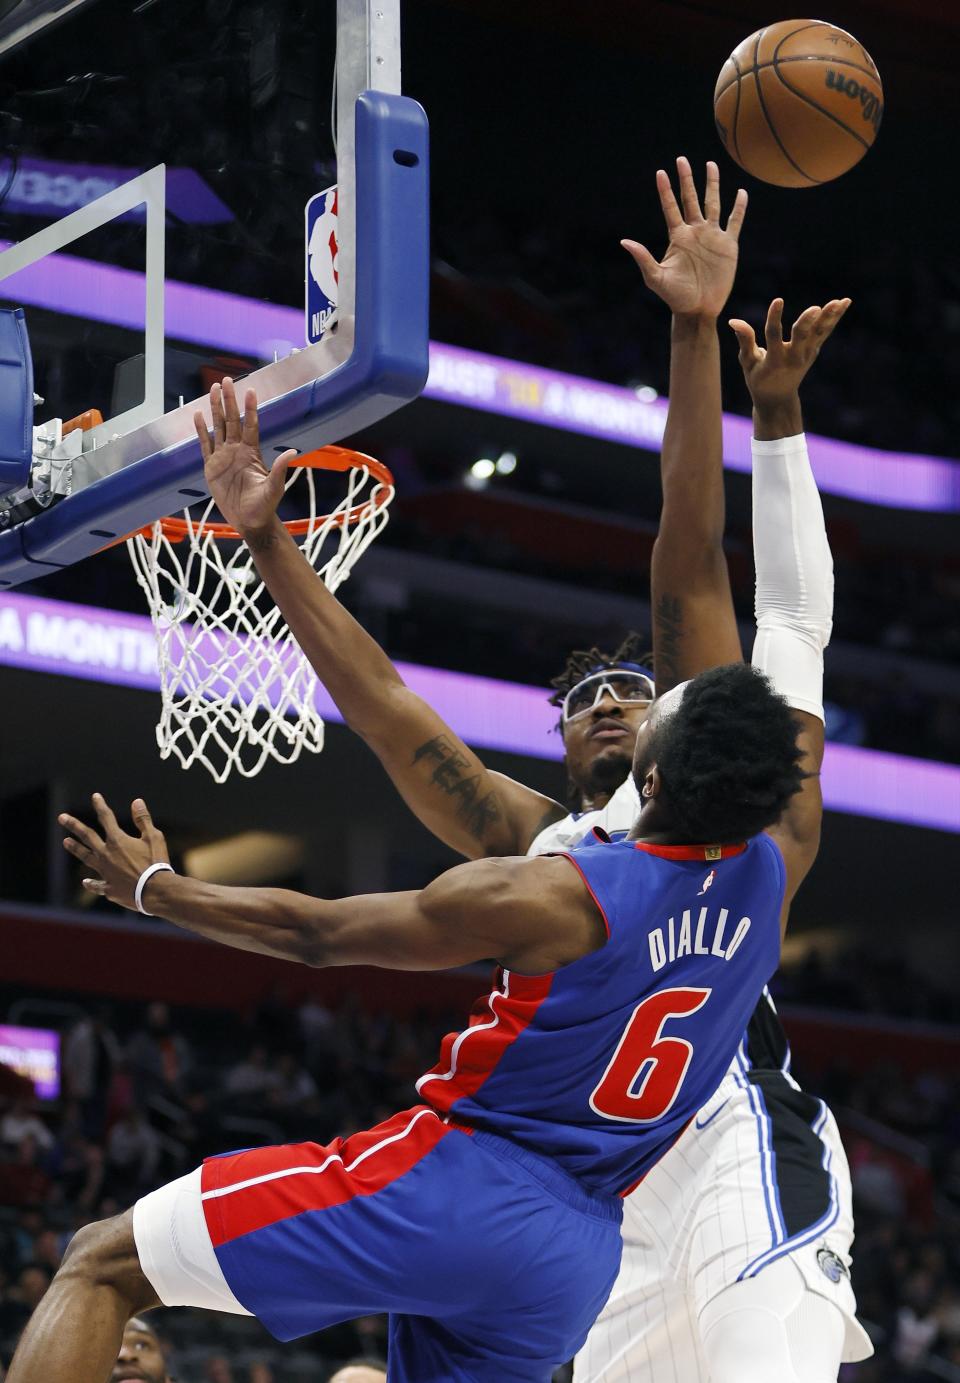 Orlando Magic center Wendell Carter Jr. (34) blocks a shot attempt by Detroit Pistons guard Hamidou Diallo (6) during the first half of an NBA basketball game Wednesday, Dec. 28, 2022, in Detroit. (AP Photo/Duane Burleson)